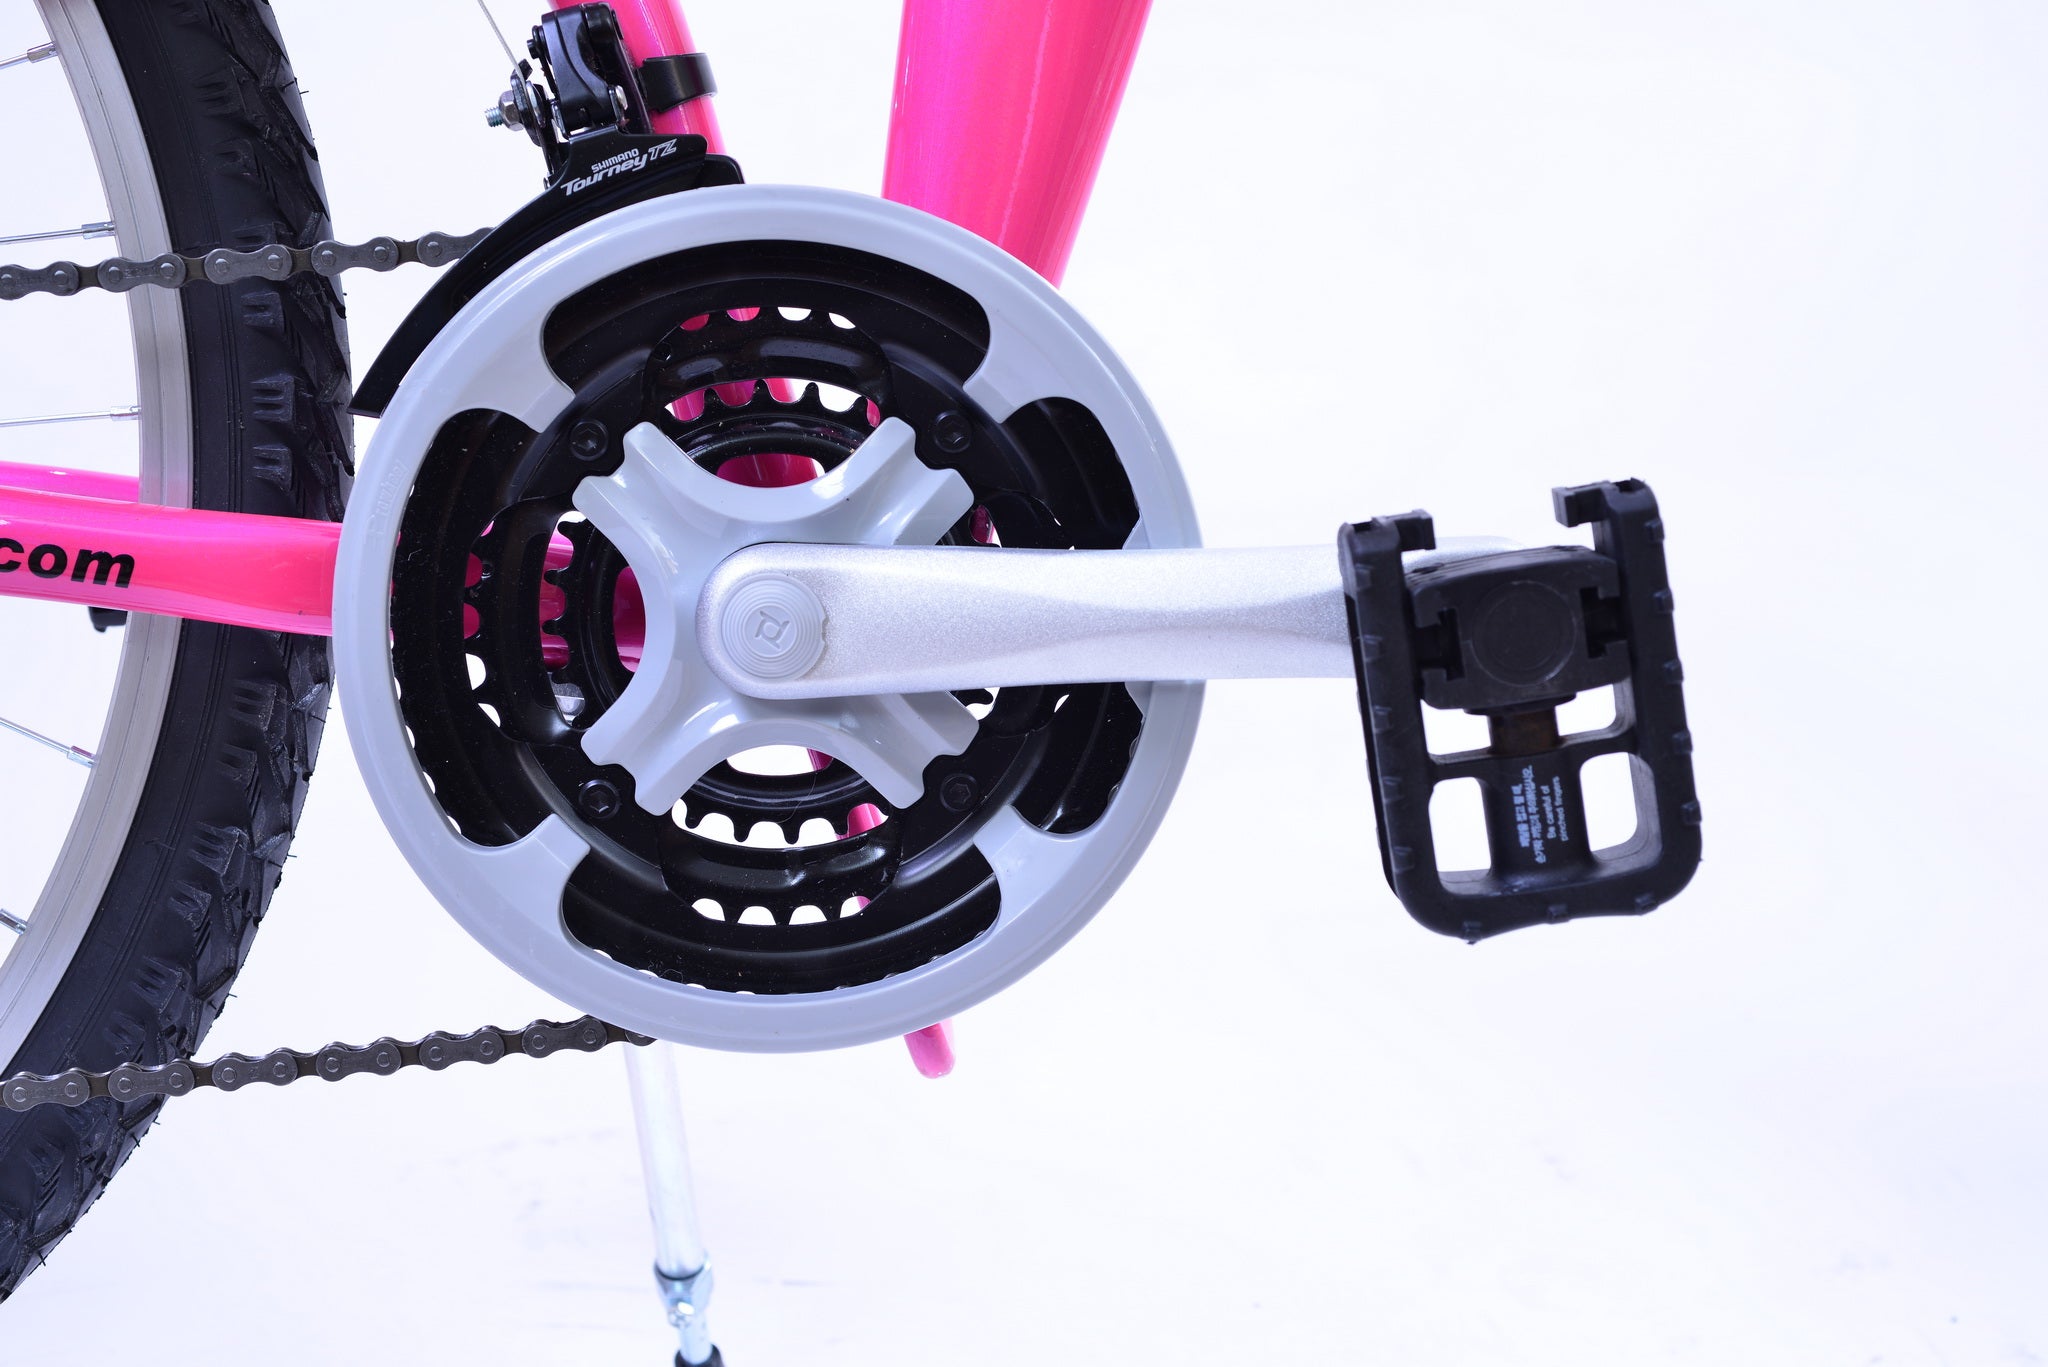 Foldable pedal on a crank arm of a bright pink bicycle.